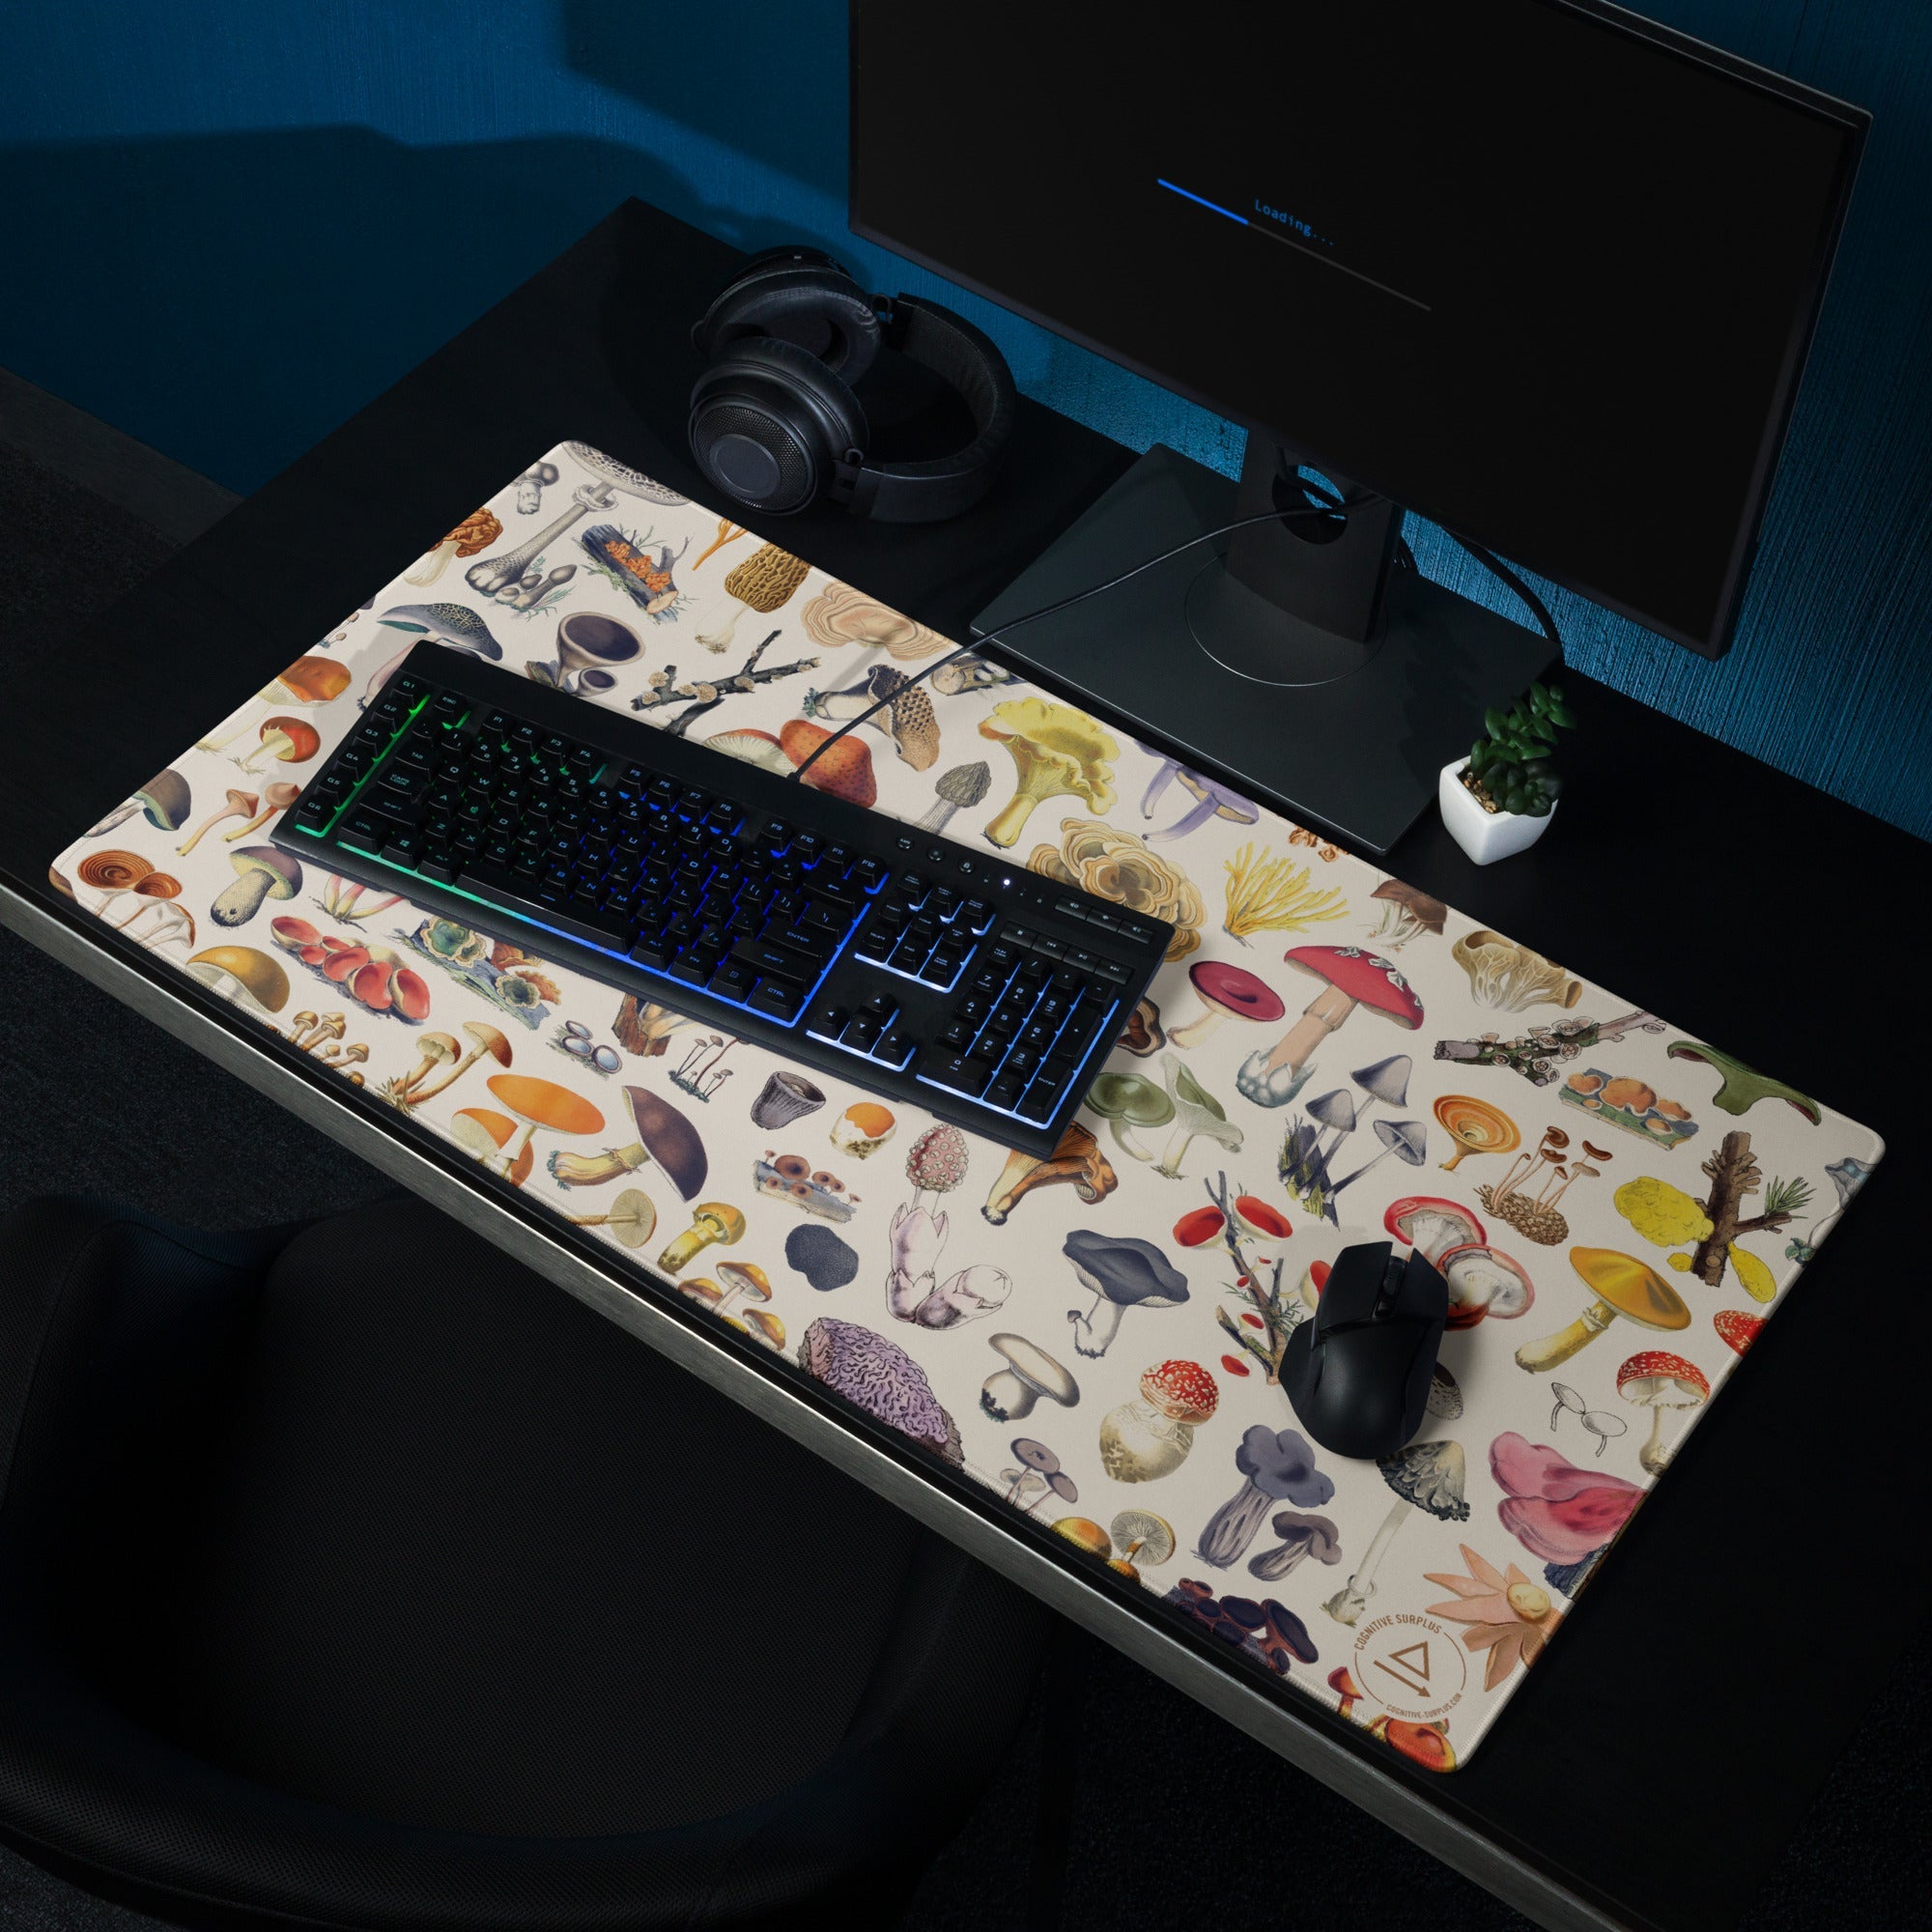 gaming-mouse-pad-white-36x18-front-65738ac13f8e6.jpg